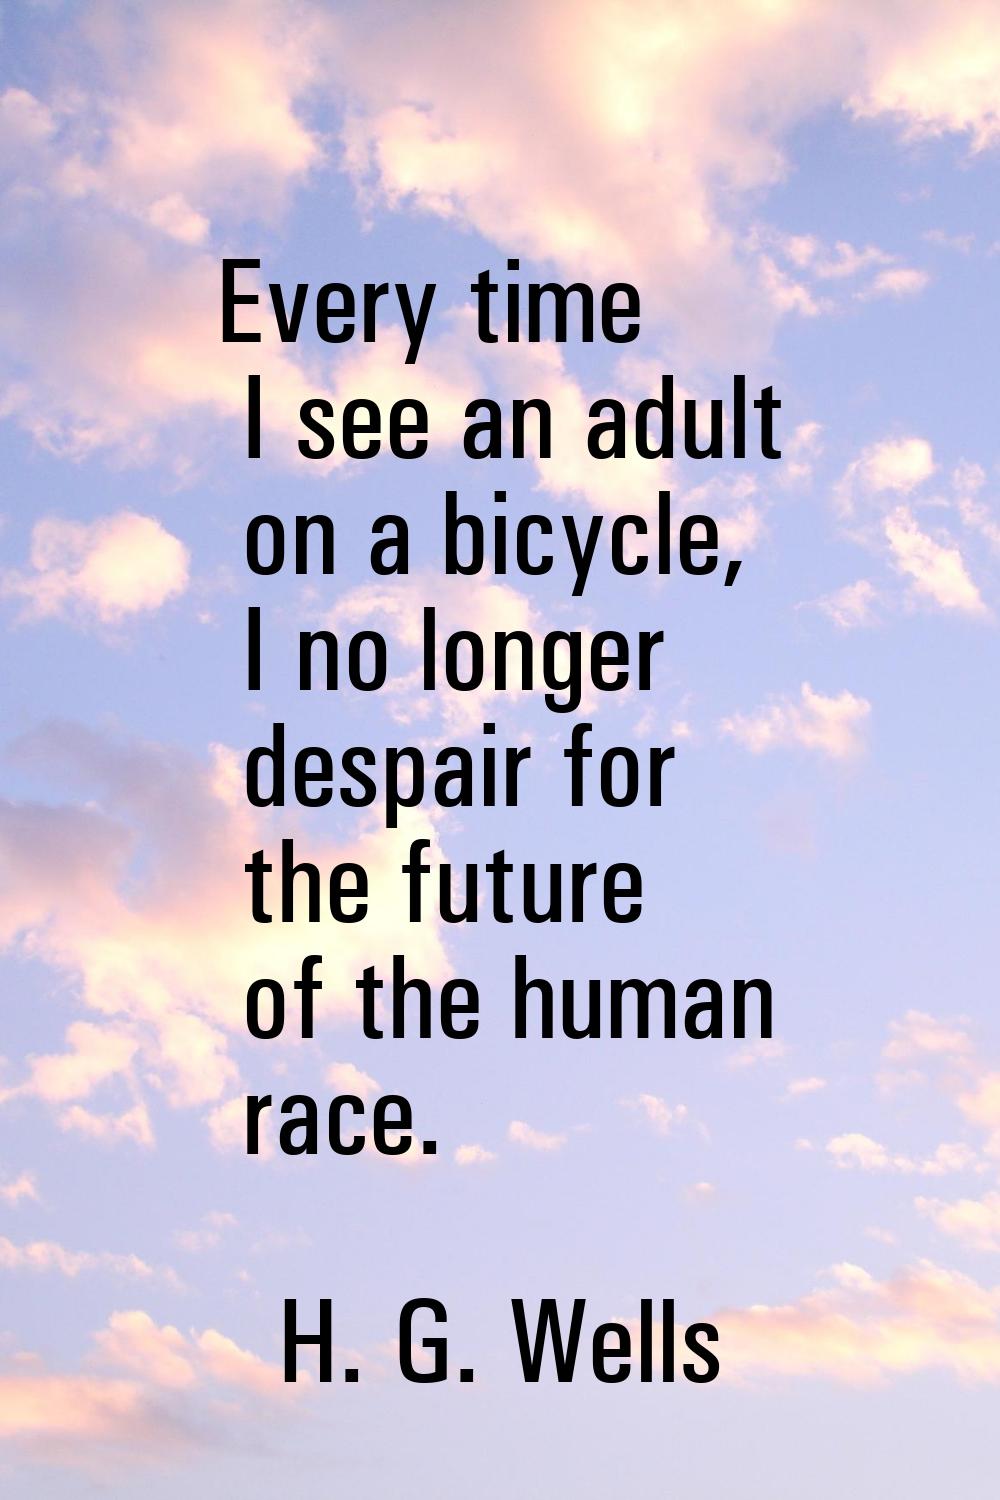 Every time I see an adult on a bicycle, I no longer despair for the future of the human race.